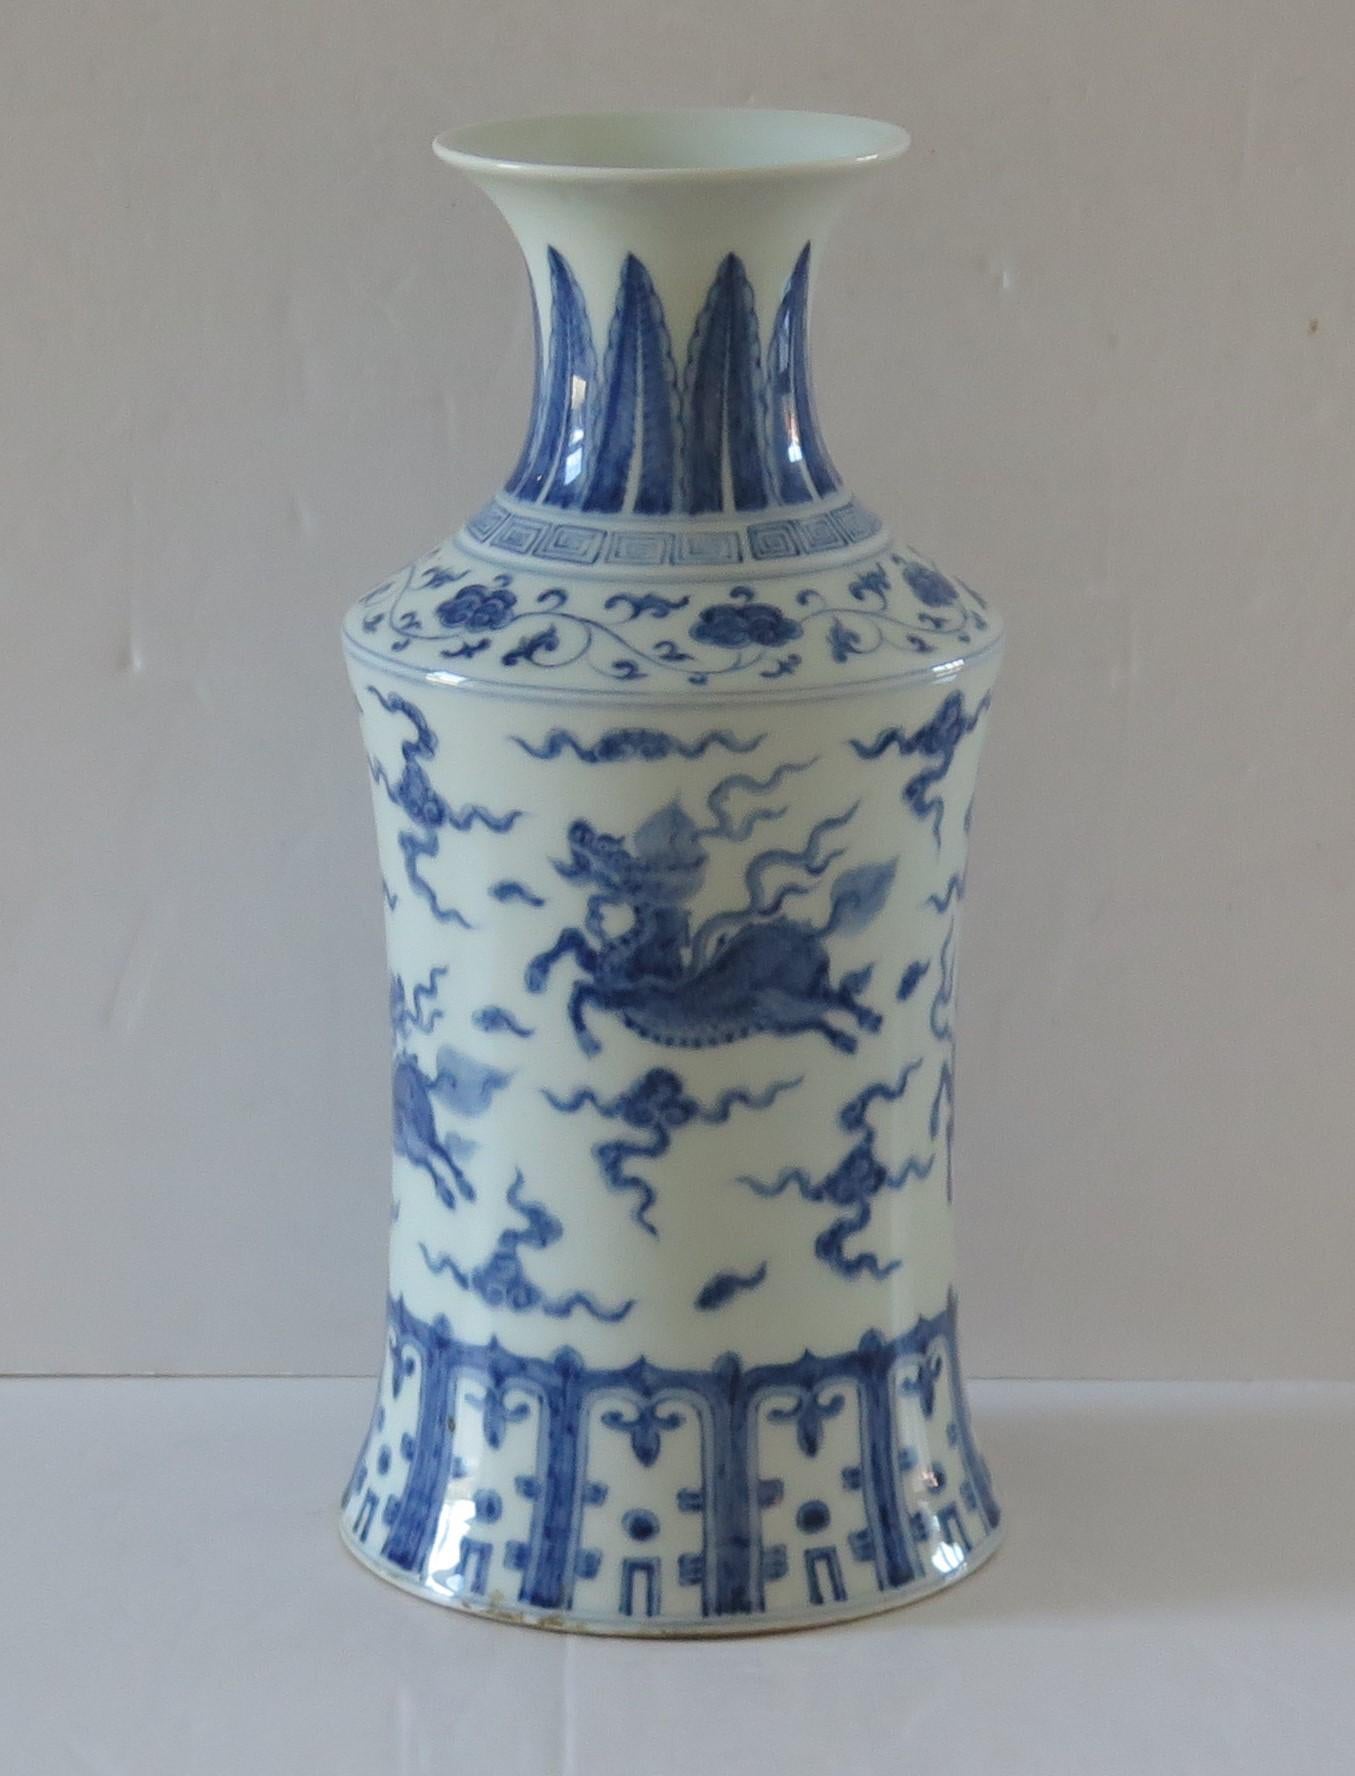 This is a beautiful mid-size Chinese Export, blue and white, porcelain vase, which we date to the first half of the 20th Century, Circa 1930.

This is a well potted piece with a baluster-rouleau shape, having a concave body, tall neck and everted